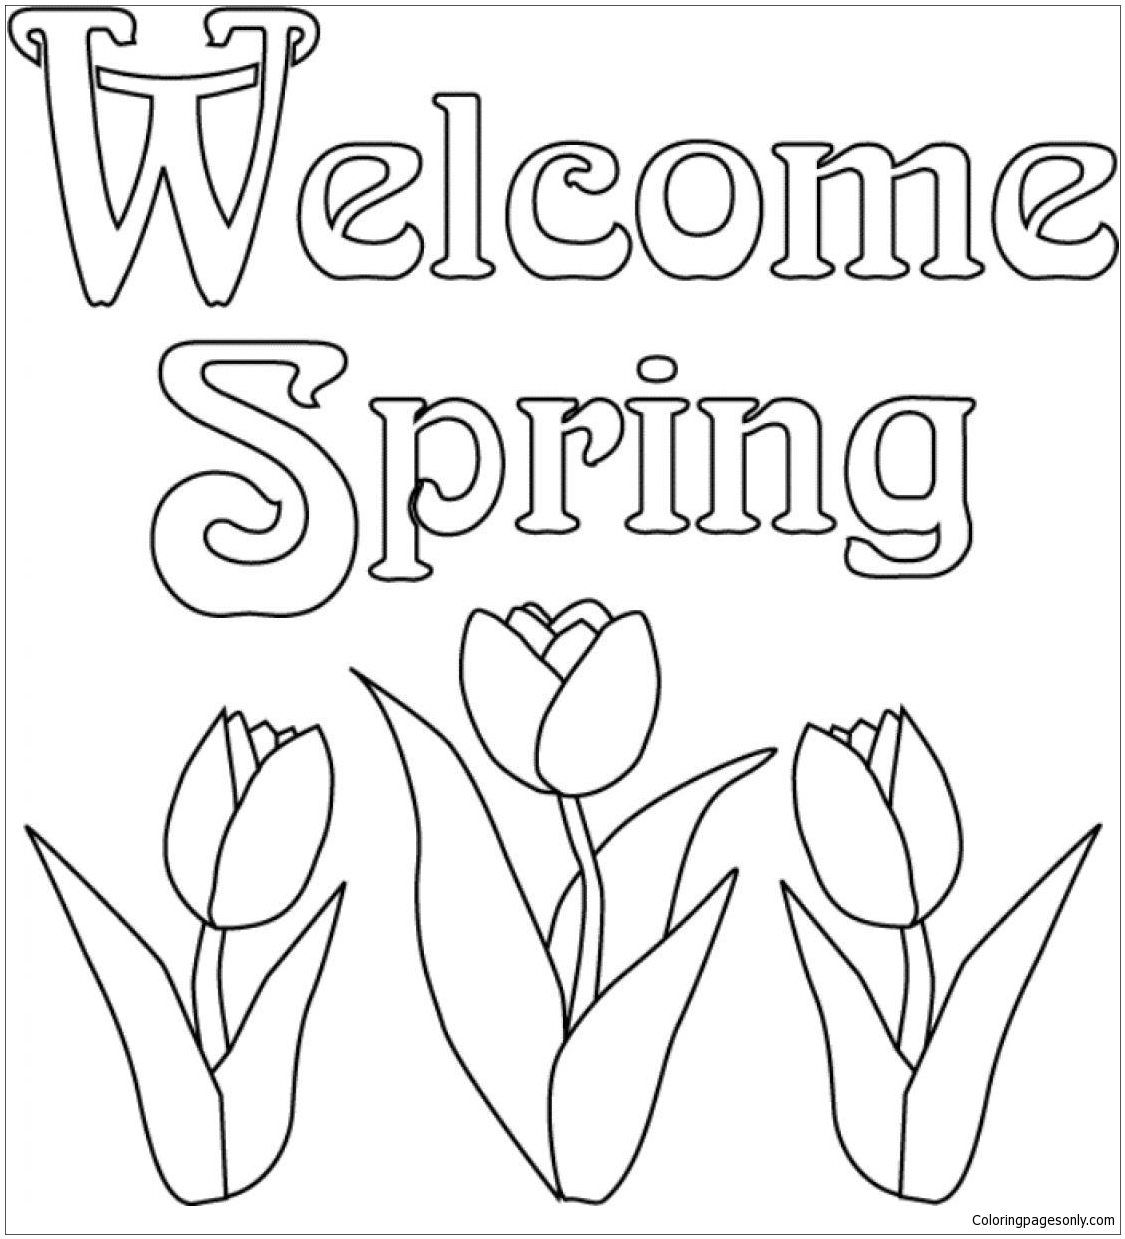 Welcome Coloring Pages Welcome Spring Coloring Page Free Coloring Pages Online